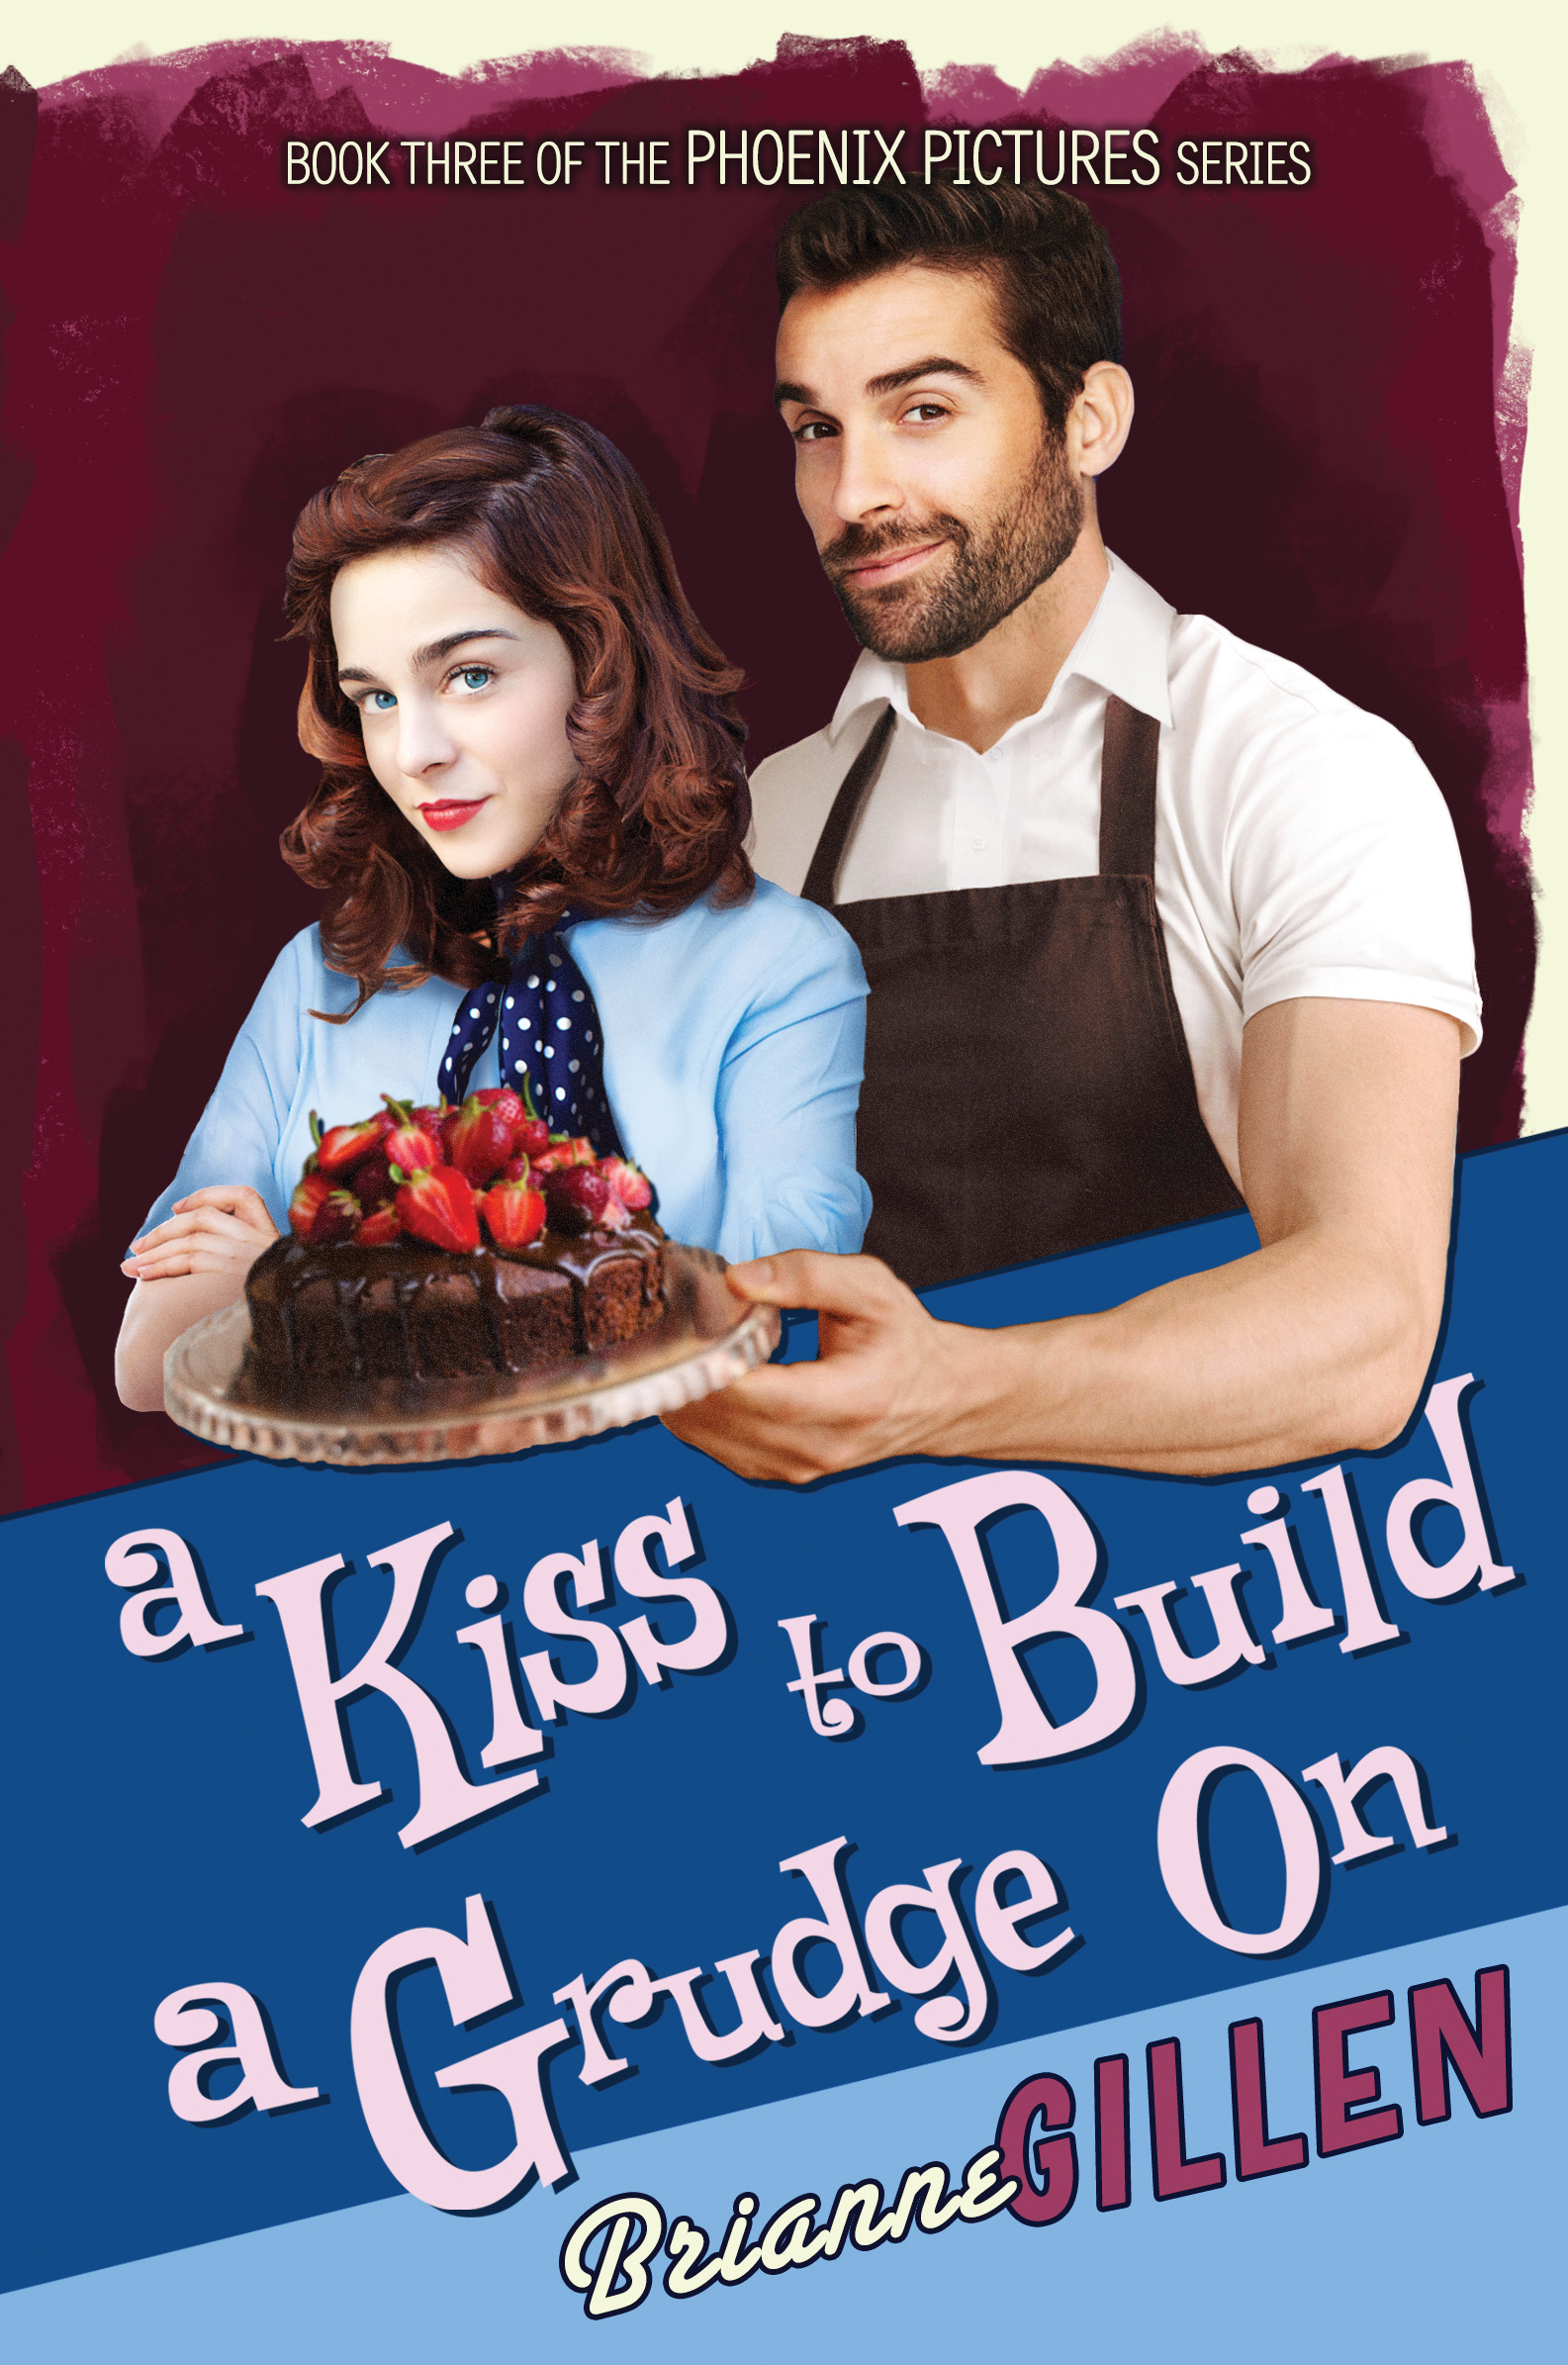 Cover of A Kiss to Build a Grudge On, featuring (against a maroon background) a red-haired white woman wearing a blue sweater, with her arms crossed over her chest, and a dark-haired white man with a beard, wearing a white shirt and an apron, and holding out a chocolate cake on a platter. A blue band with pink lettering across the bottom reads "A Kiss to Build a Grudge On. Brianne Gillen."